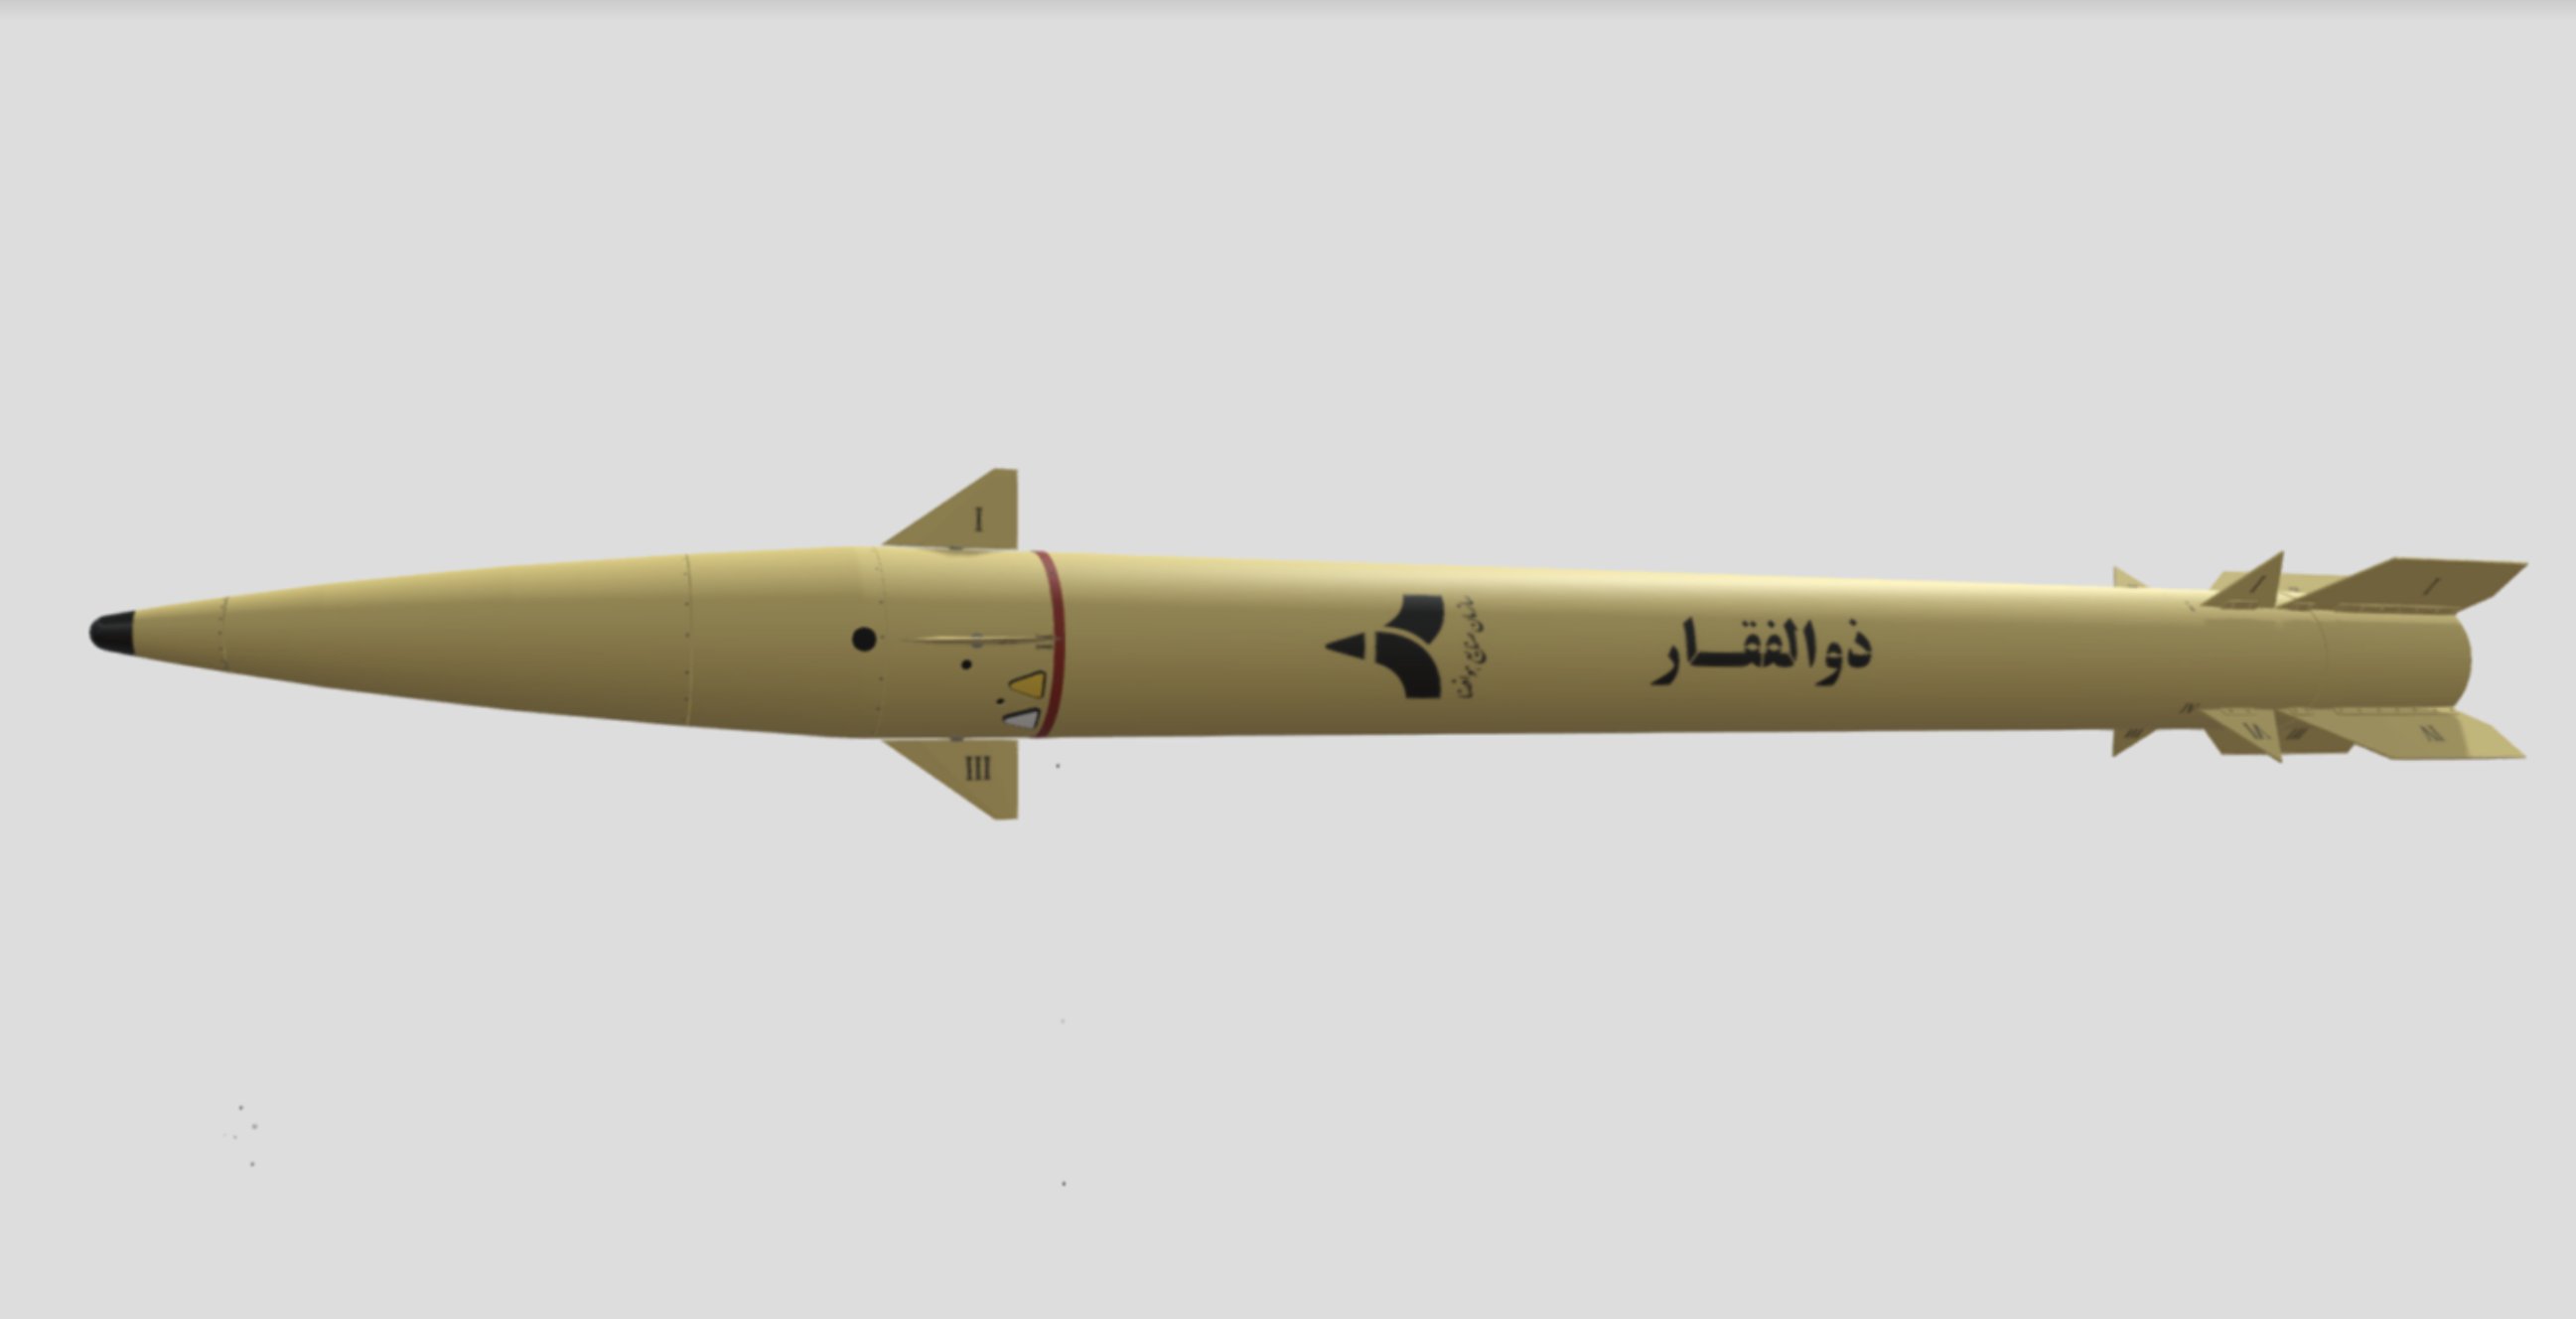 Dr. Jeffrey Lewis on Twitter: "The Zolfaghar can carry a 600 kg payload to about 700 km. Our model suggests that Iran achieved that by both making the missile bigger and, more